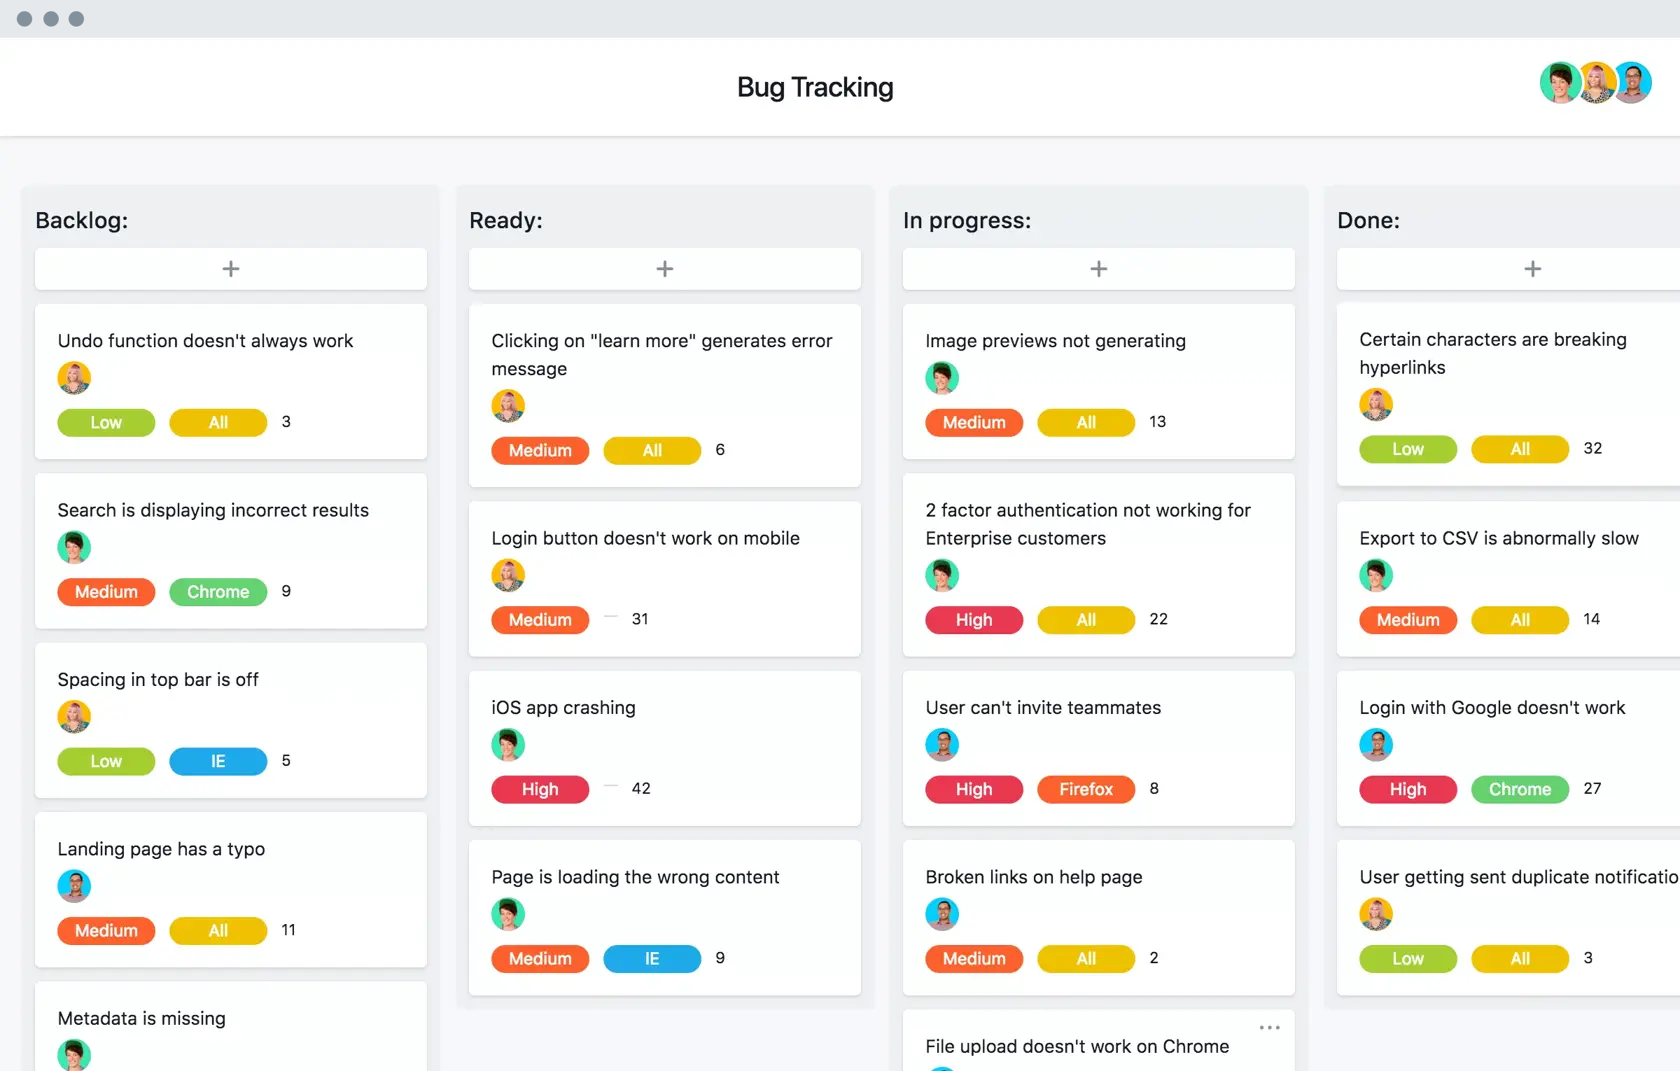 [Old product ui] Bug tracking template in Asana, Kanban board style project view (Boards)